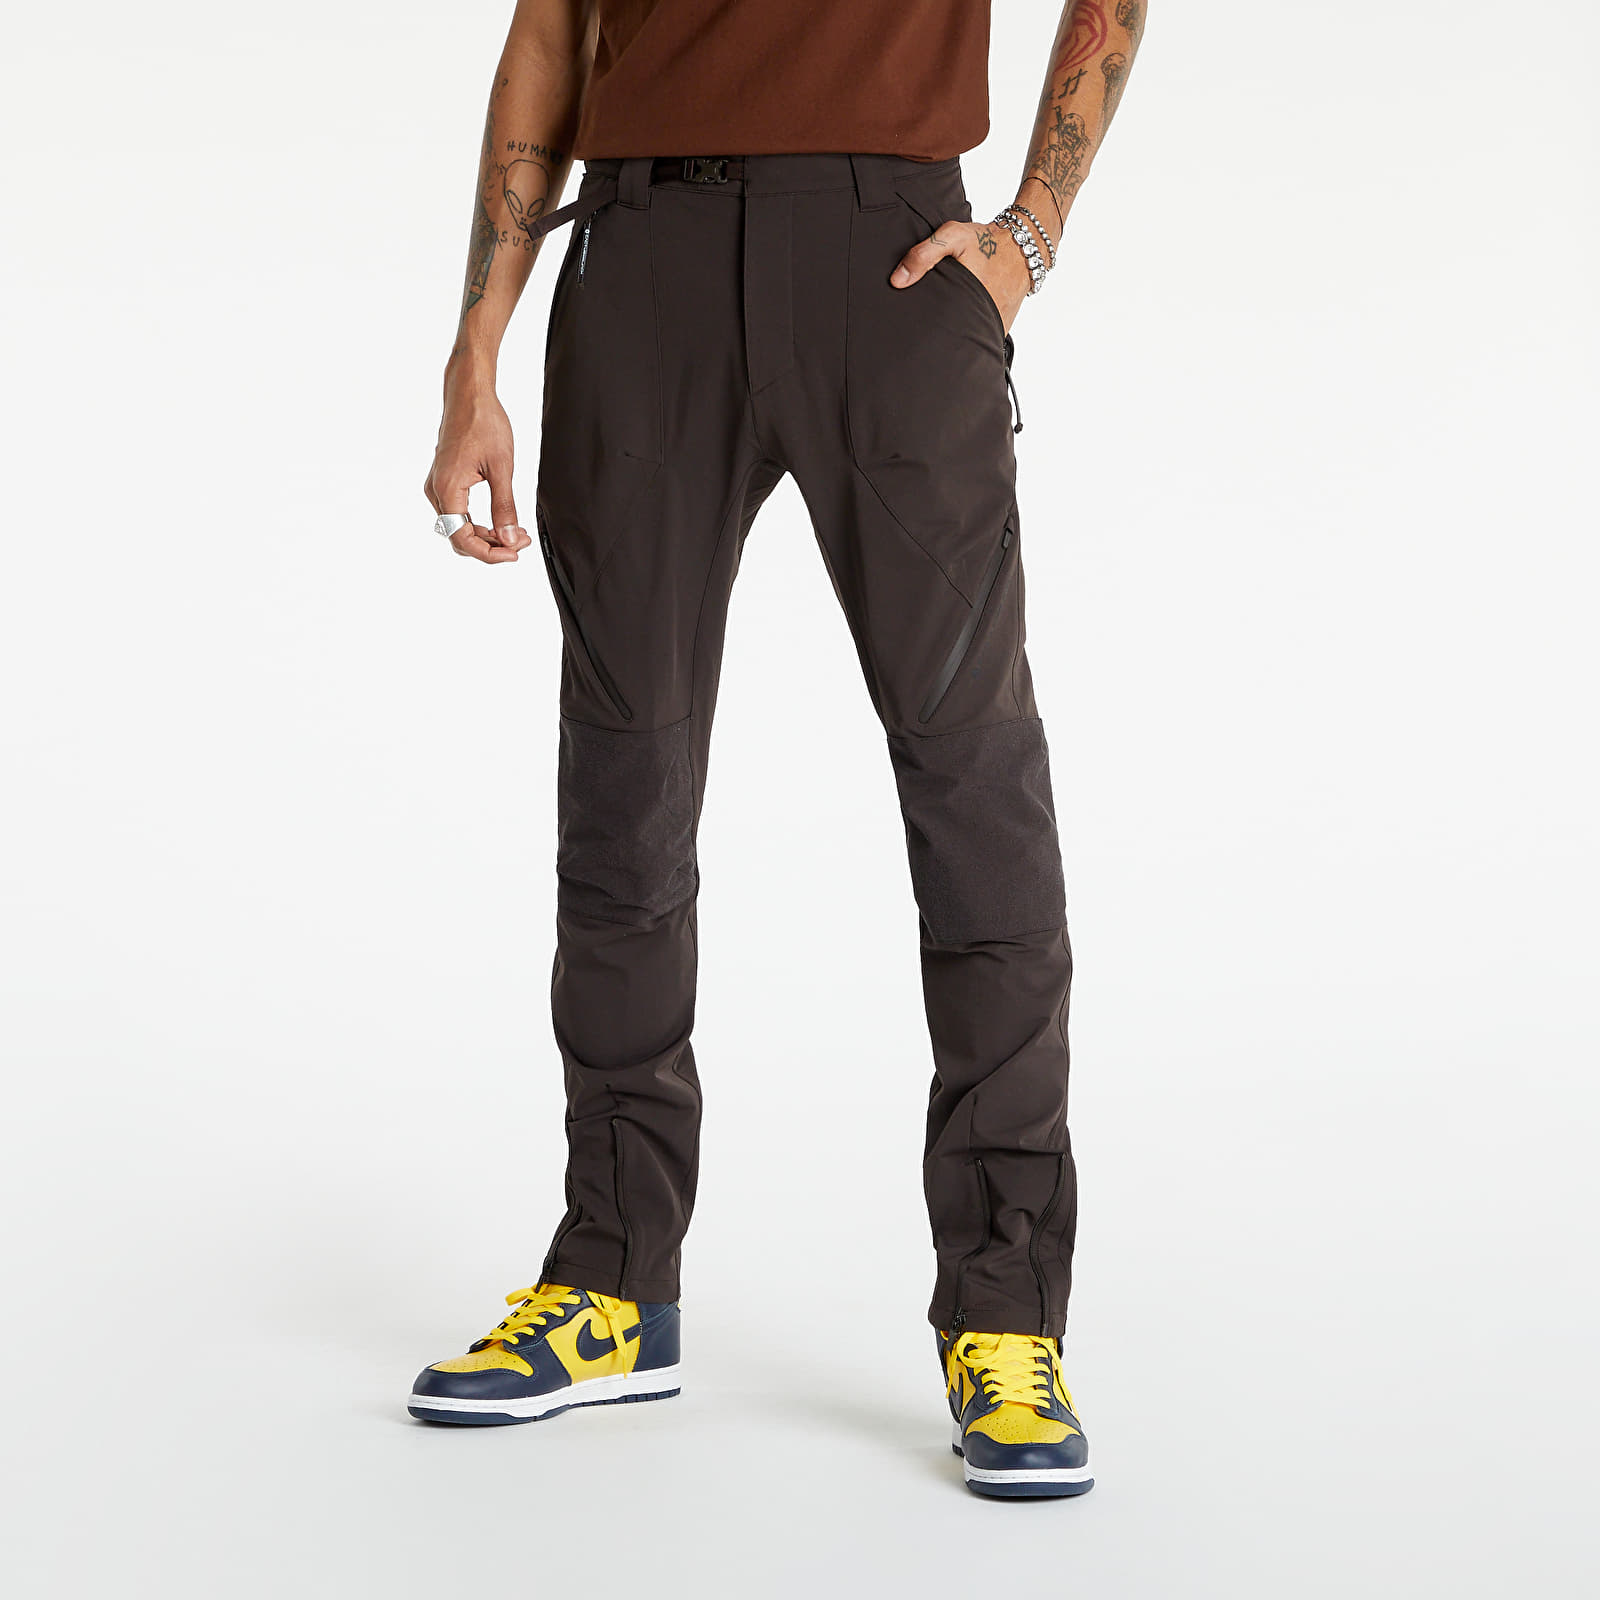 Nike x Cact.us Corp Men's Woven Trousers